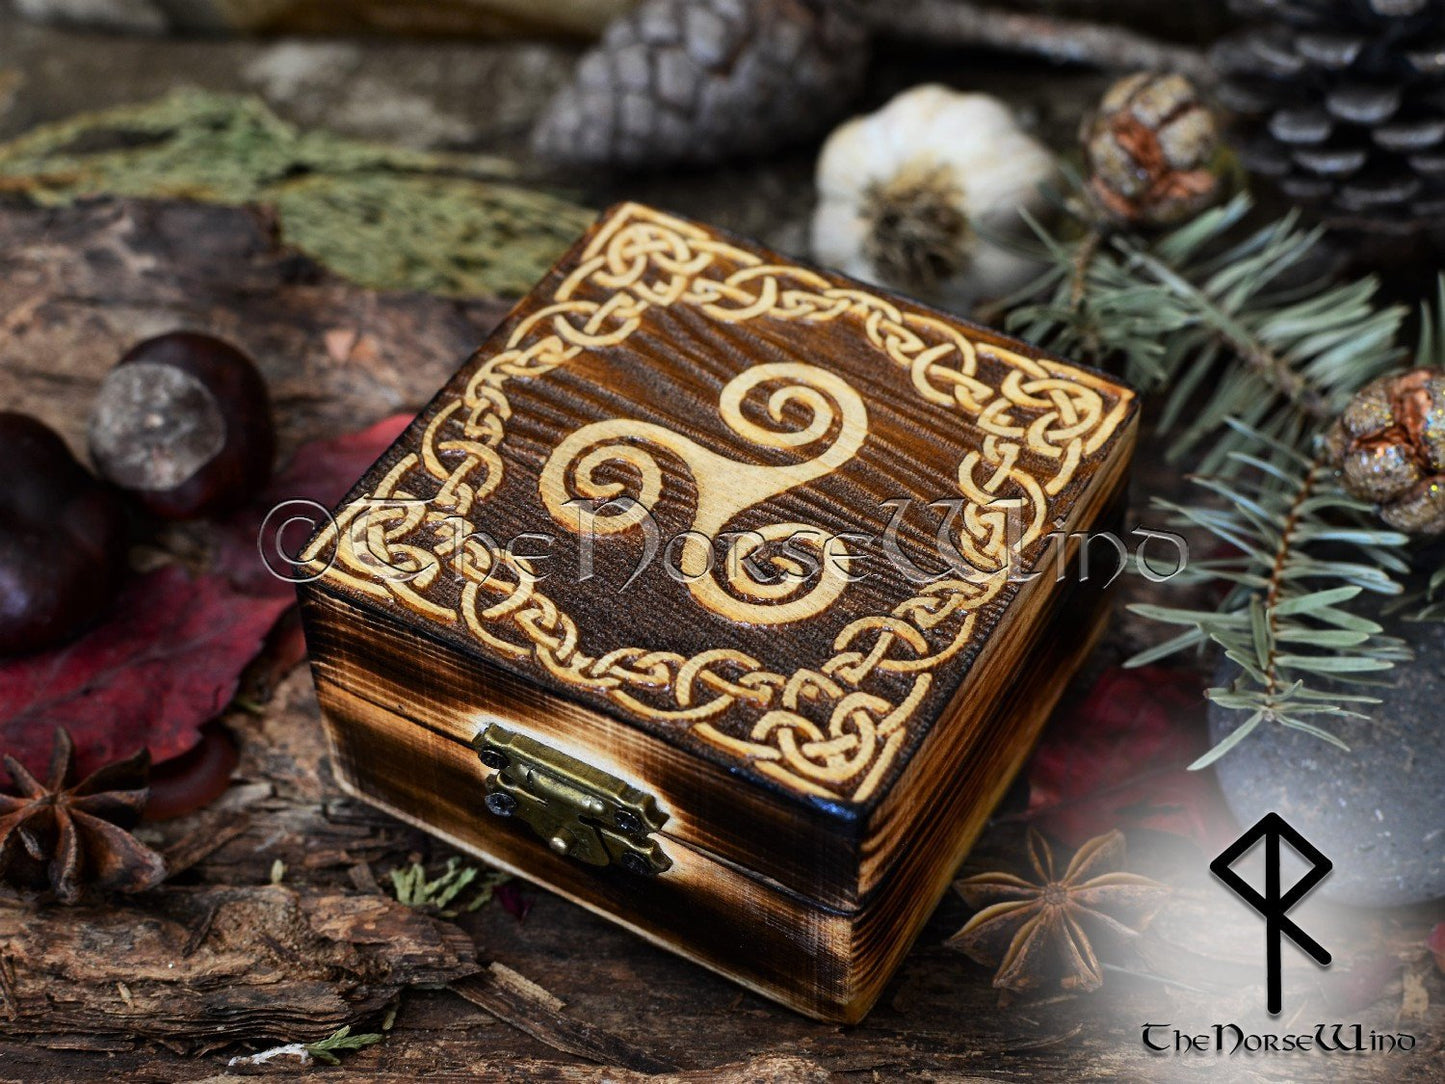 Triskele Carved Wooden Box Triskelion Celtic Runes Chest Wiccan Altar Viking / Norse Mythology Asatru Keepsake Box Jewelry Box Wicca Pagan TheNorseWind